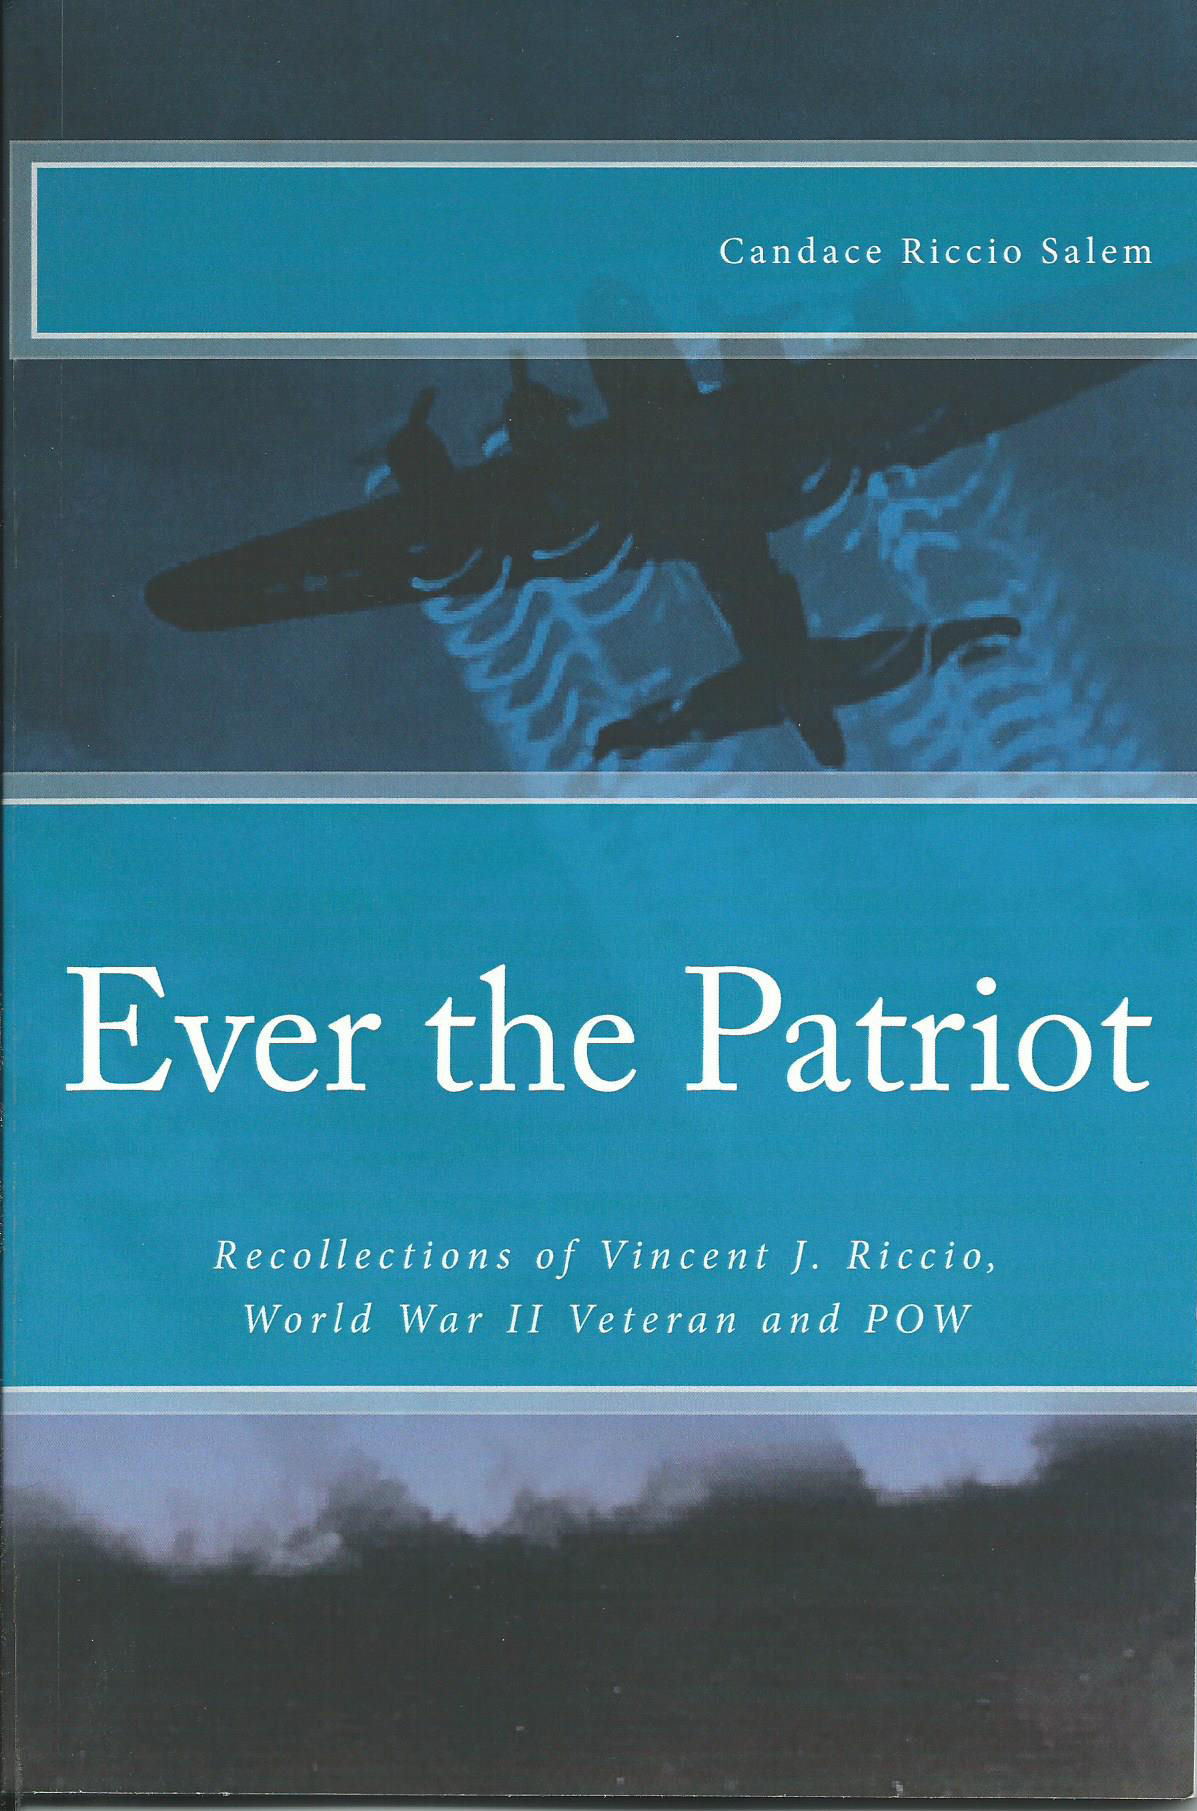 FREE: Ever the Patriot: Recollections of Vincent J. Riccio, World War II Veteran and POW by Candace Riccio Salem